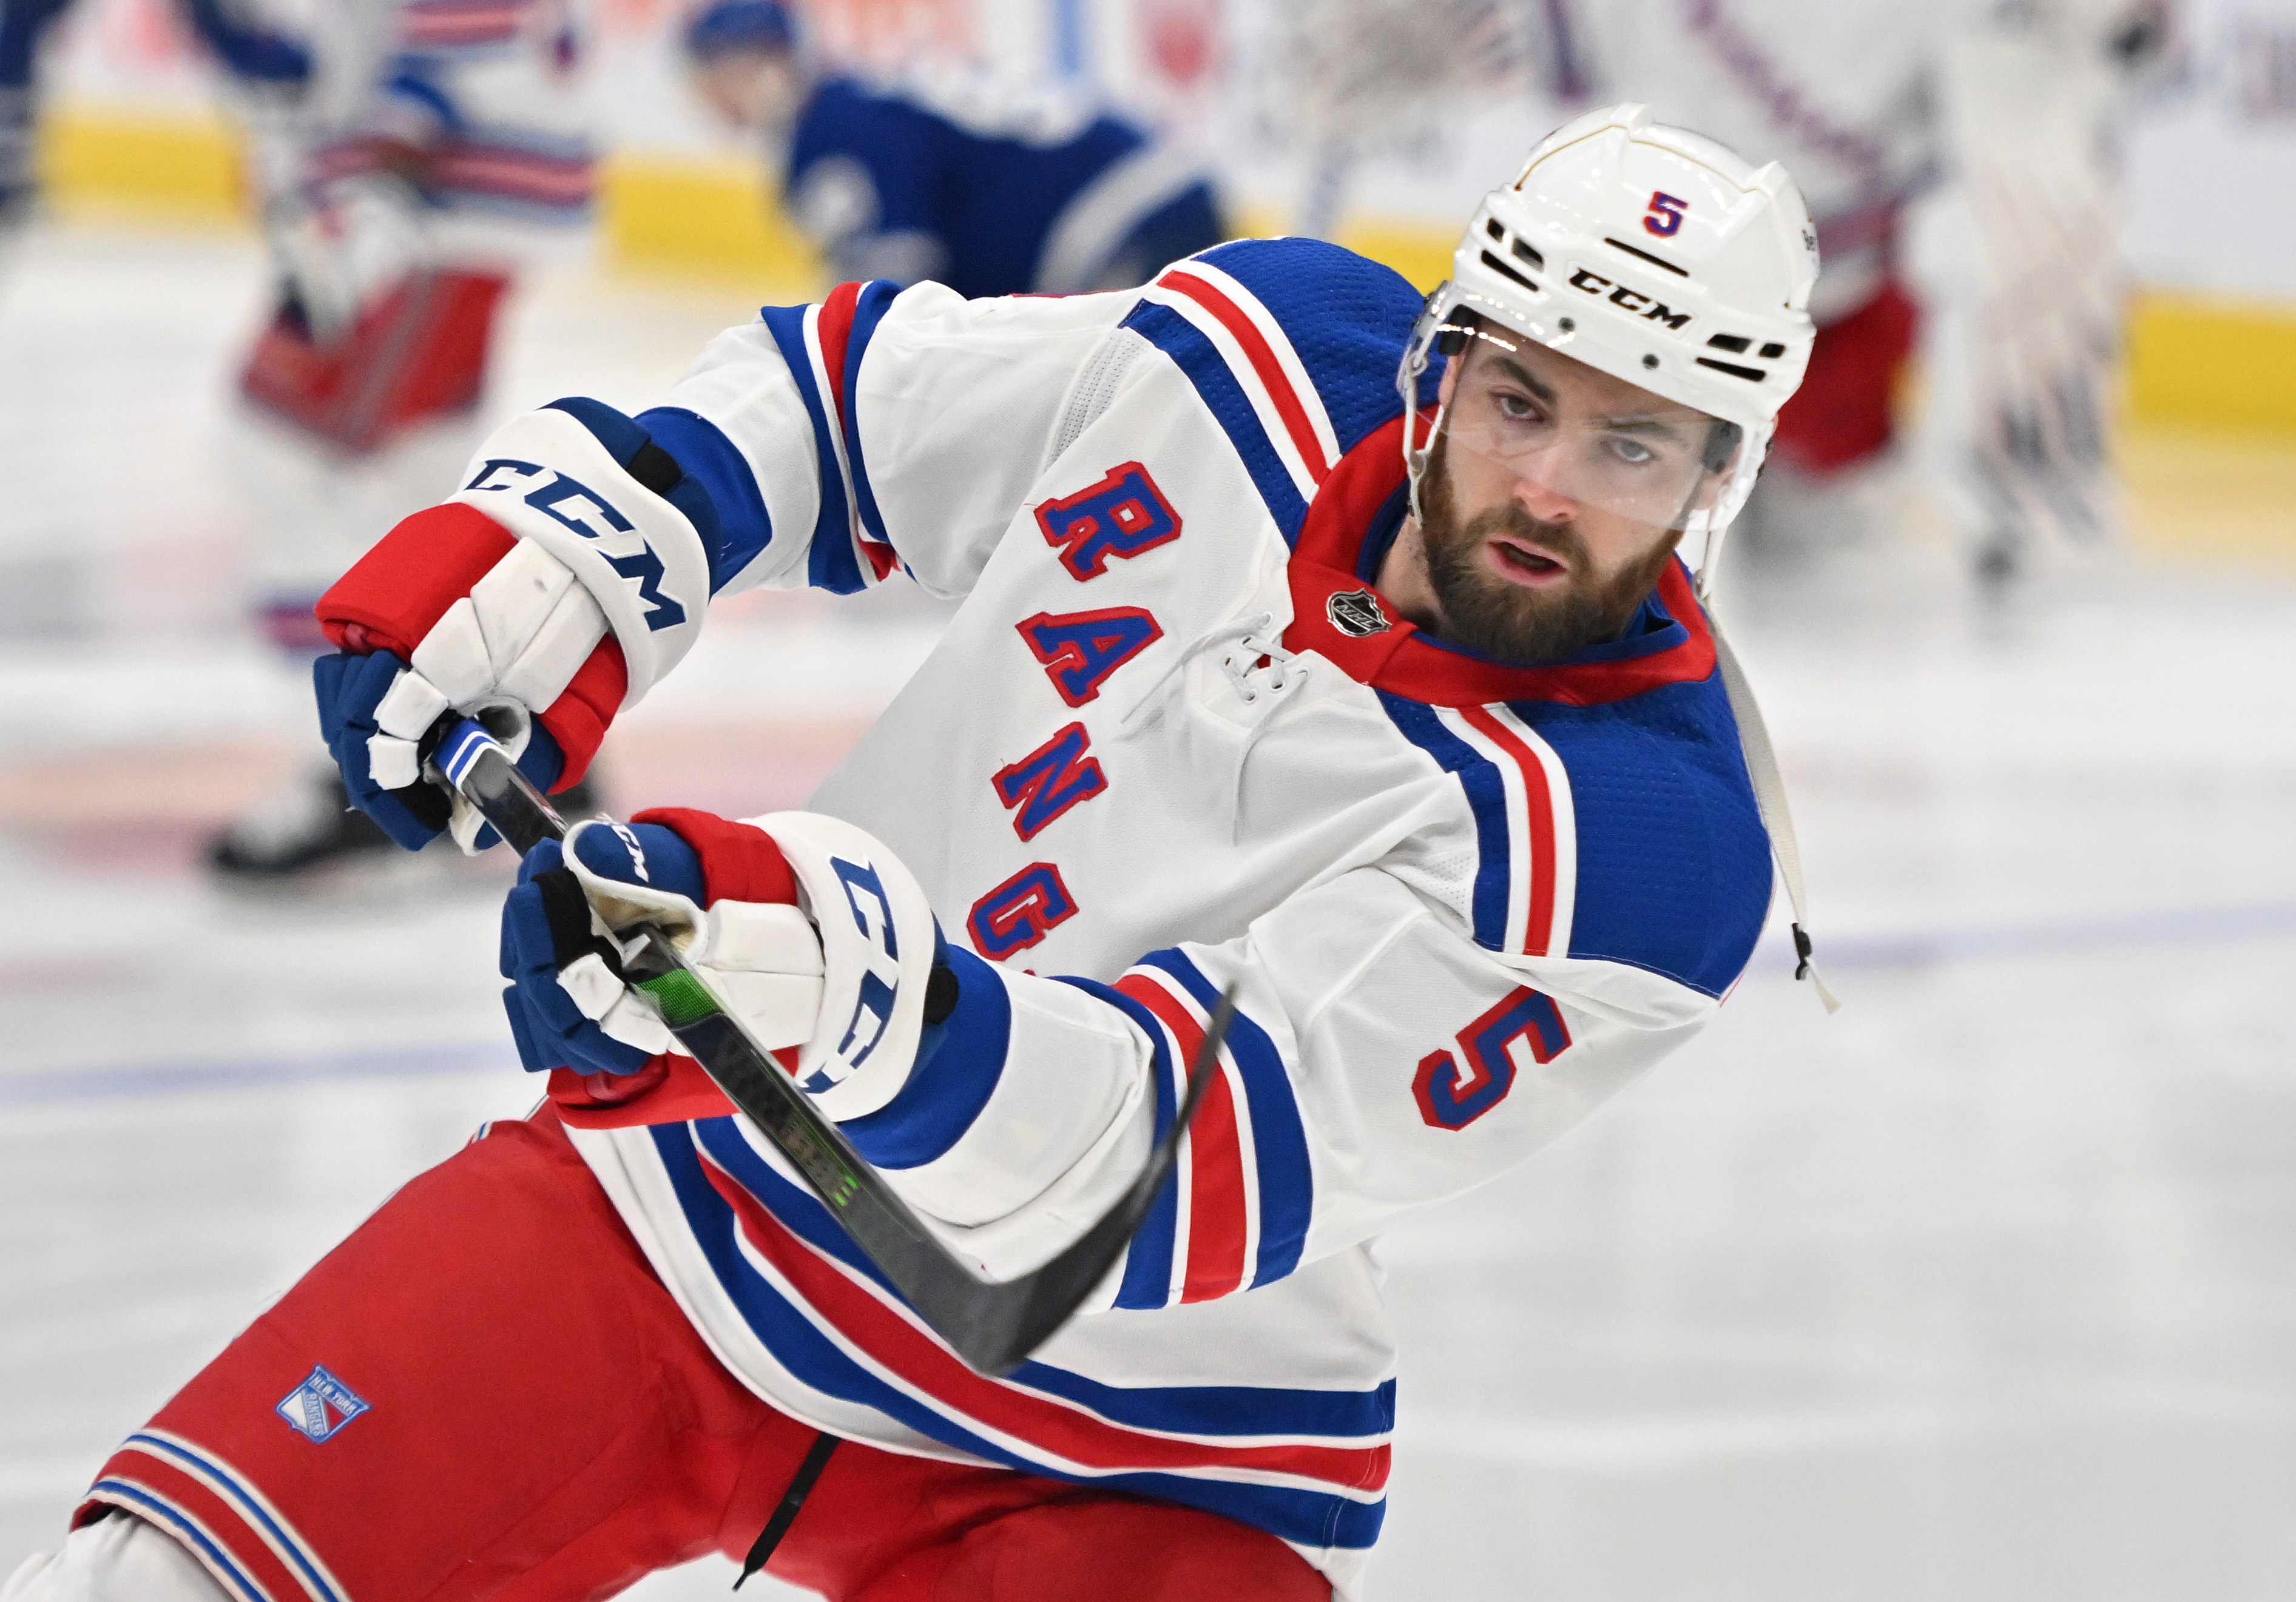 Rangers Sign Forward To Extension - NHL Trade Rumors 